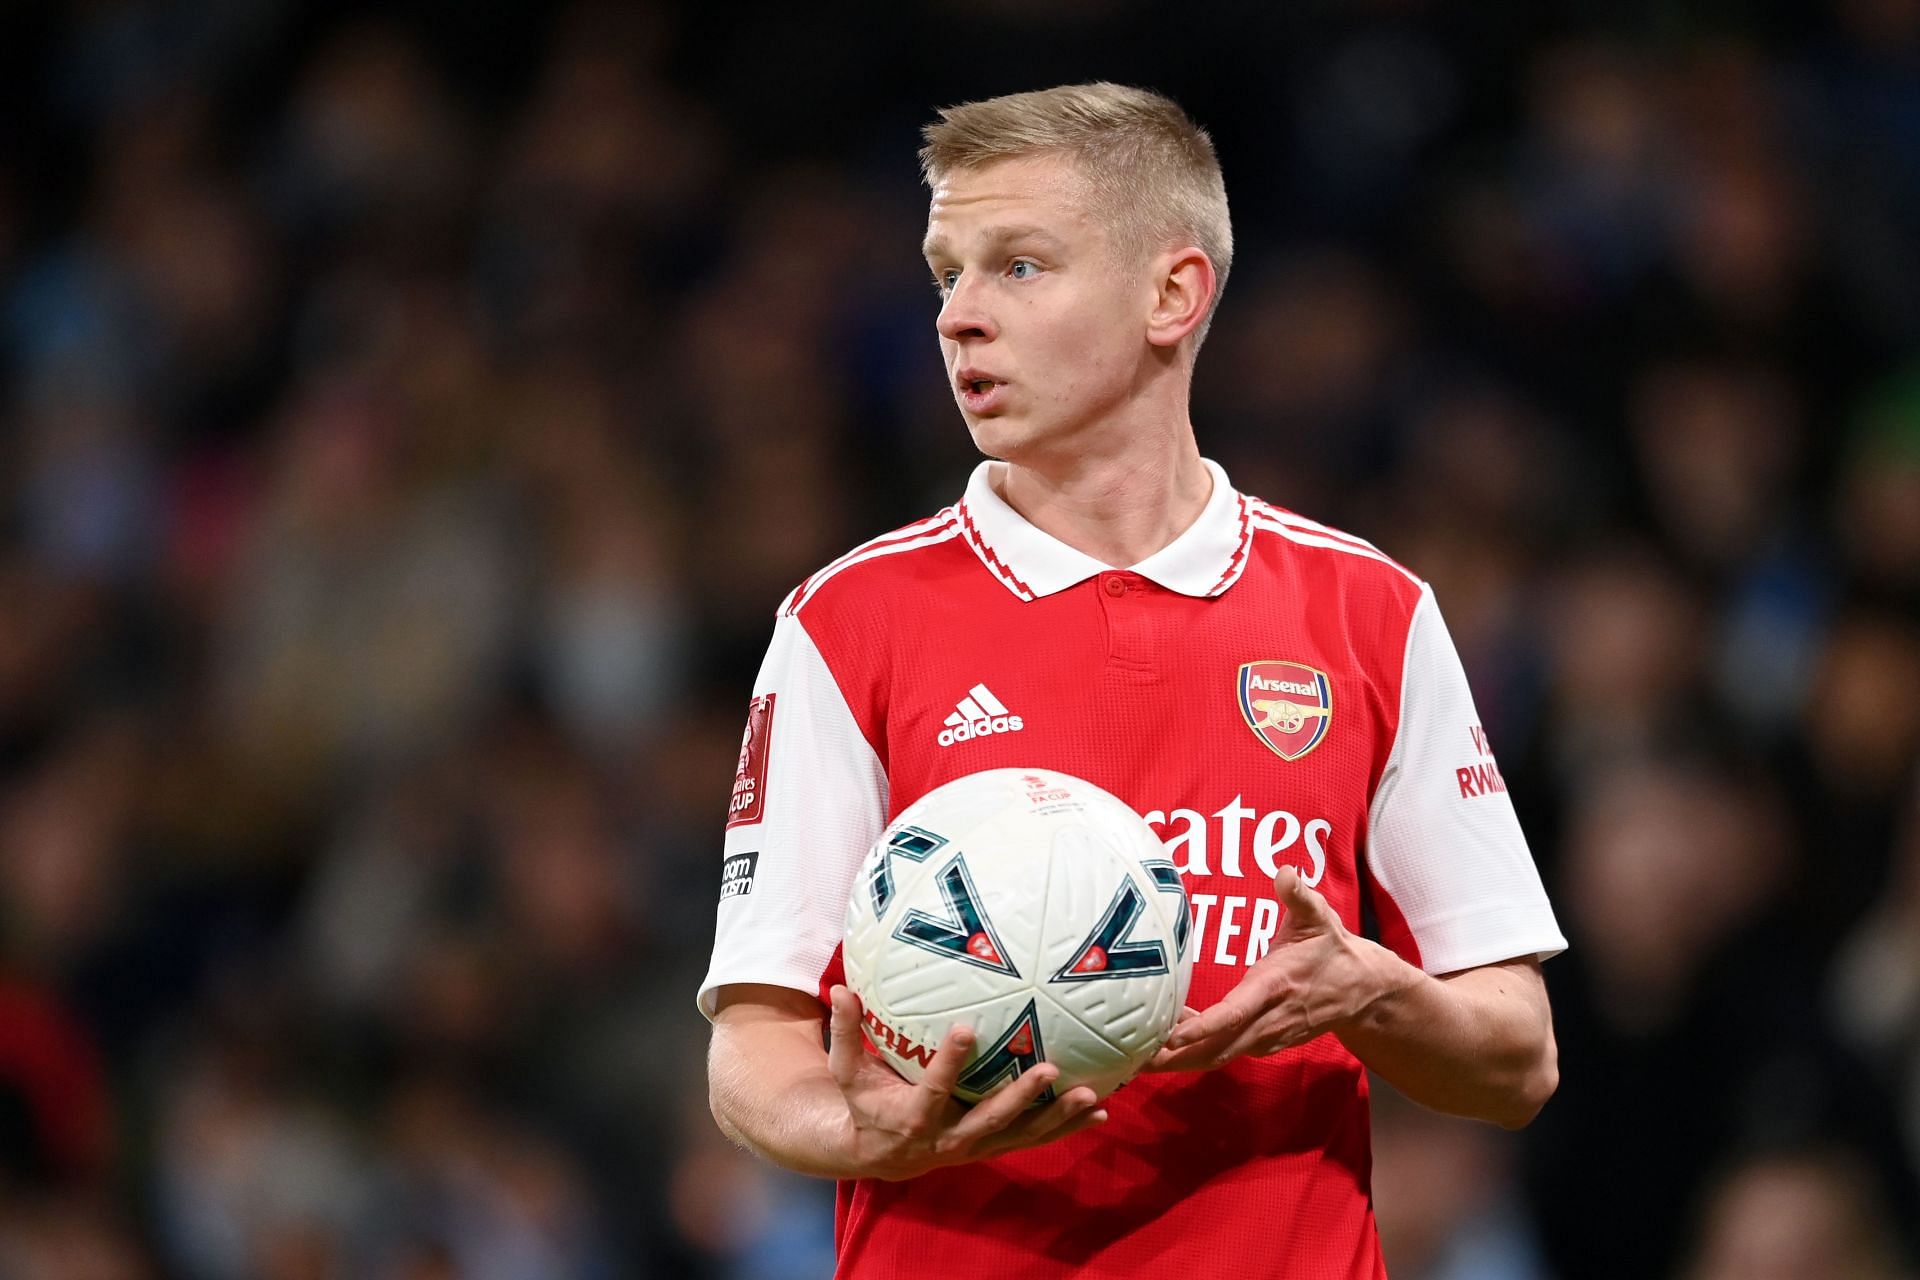 Tony Adams suggested Zinchenko (in pic) to be benched for the City clash.